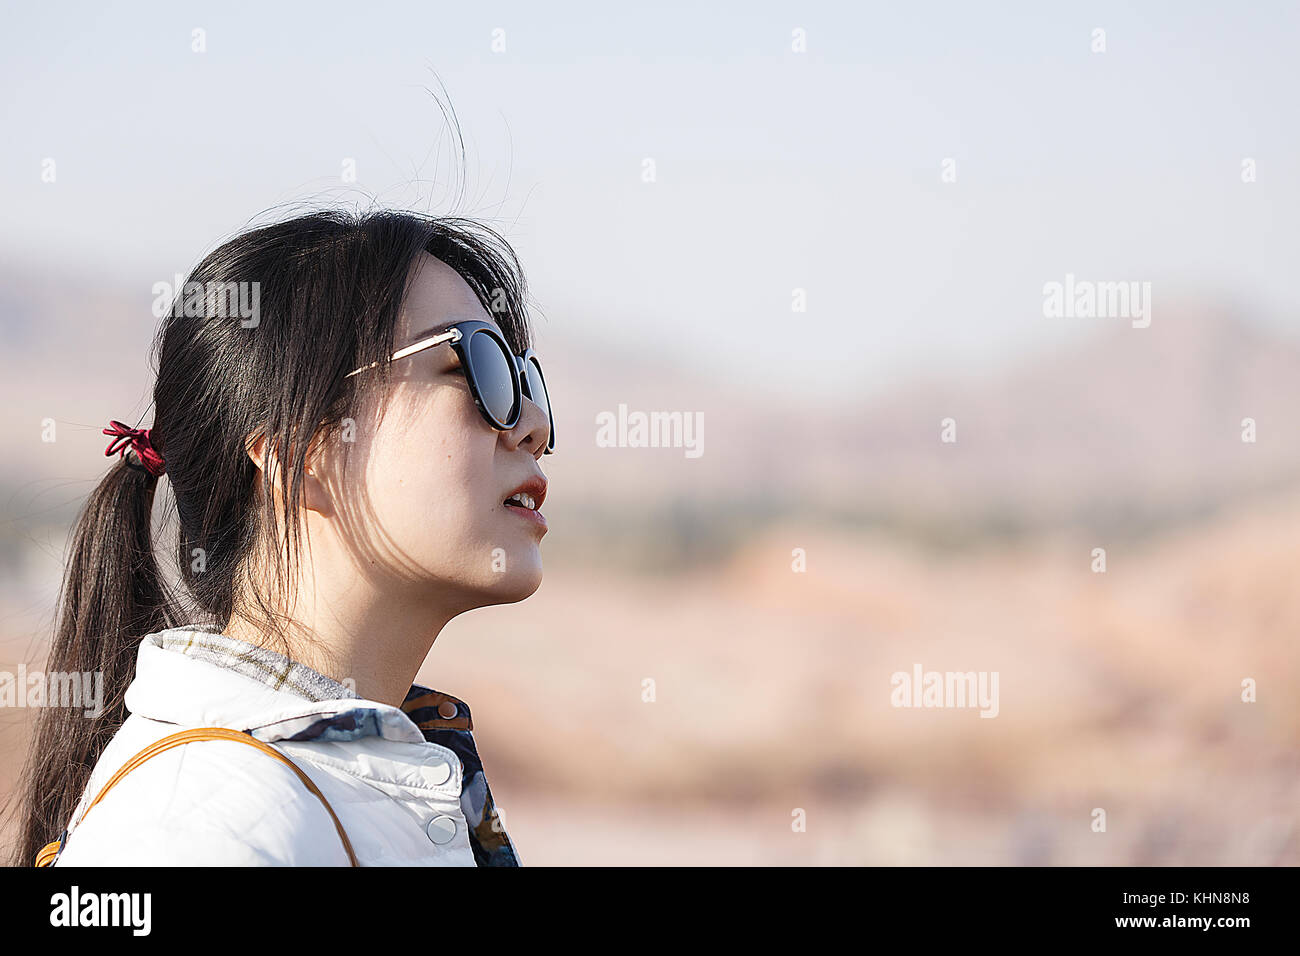 Zhanghye,China - October 15,2017: Young woman visits the Zhanghye Danxia geological park on October 15, China. Stock Photo